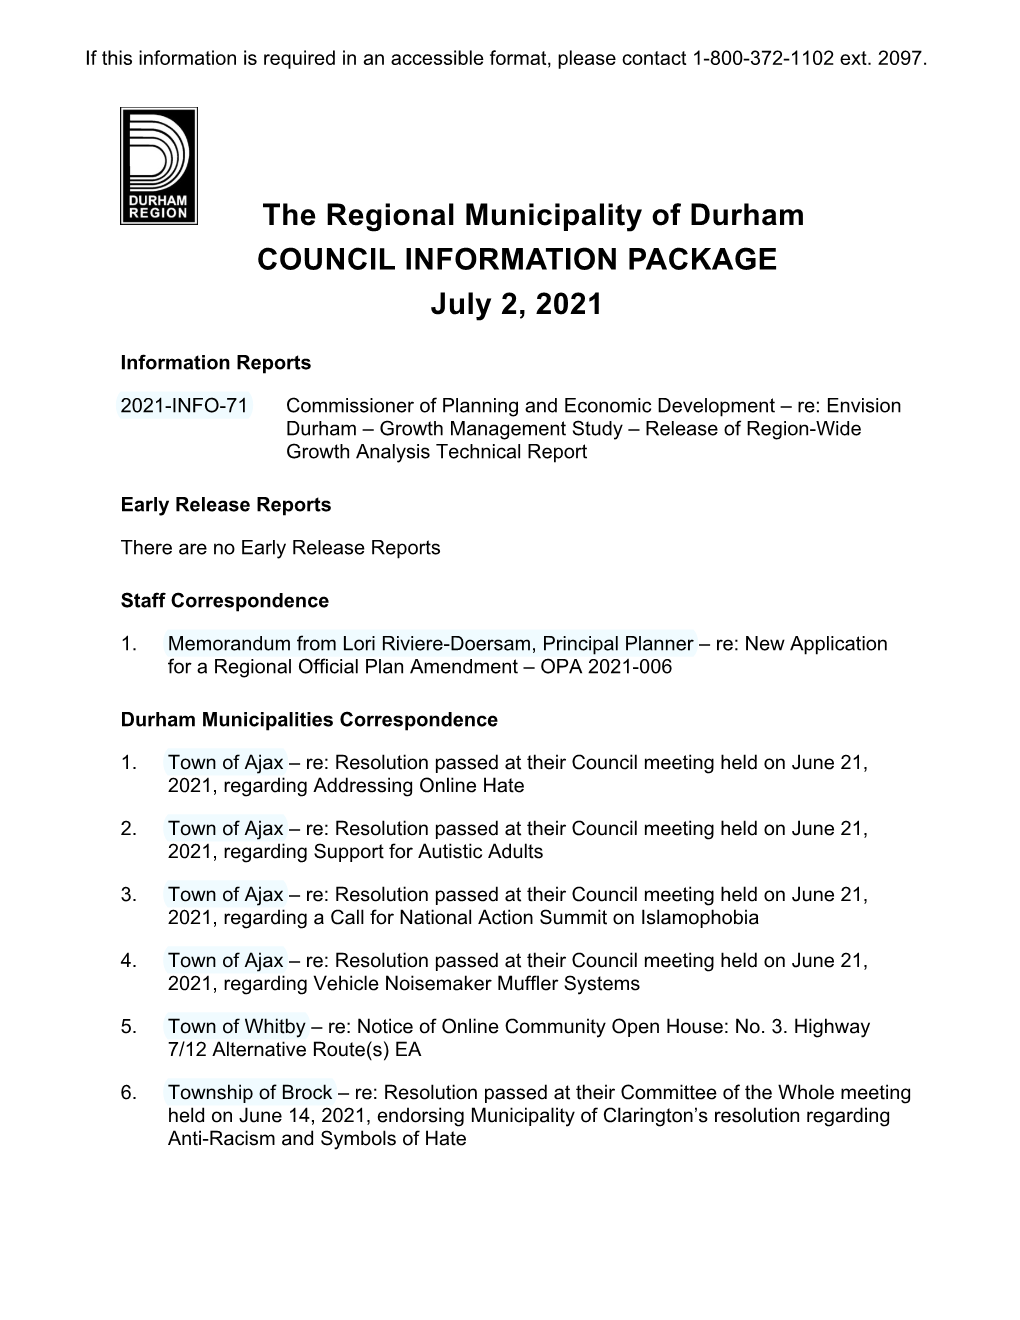 COUNCIL INFORMATION PACKAGE July 2, 2021